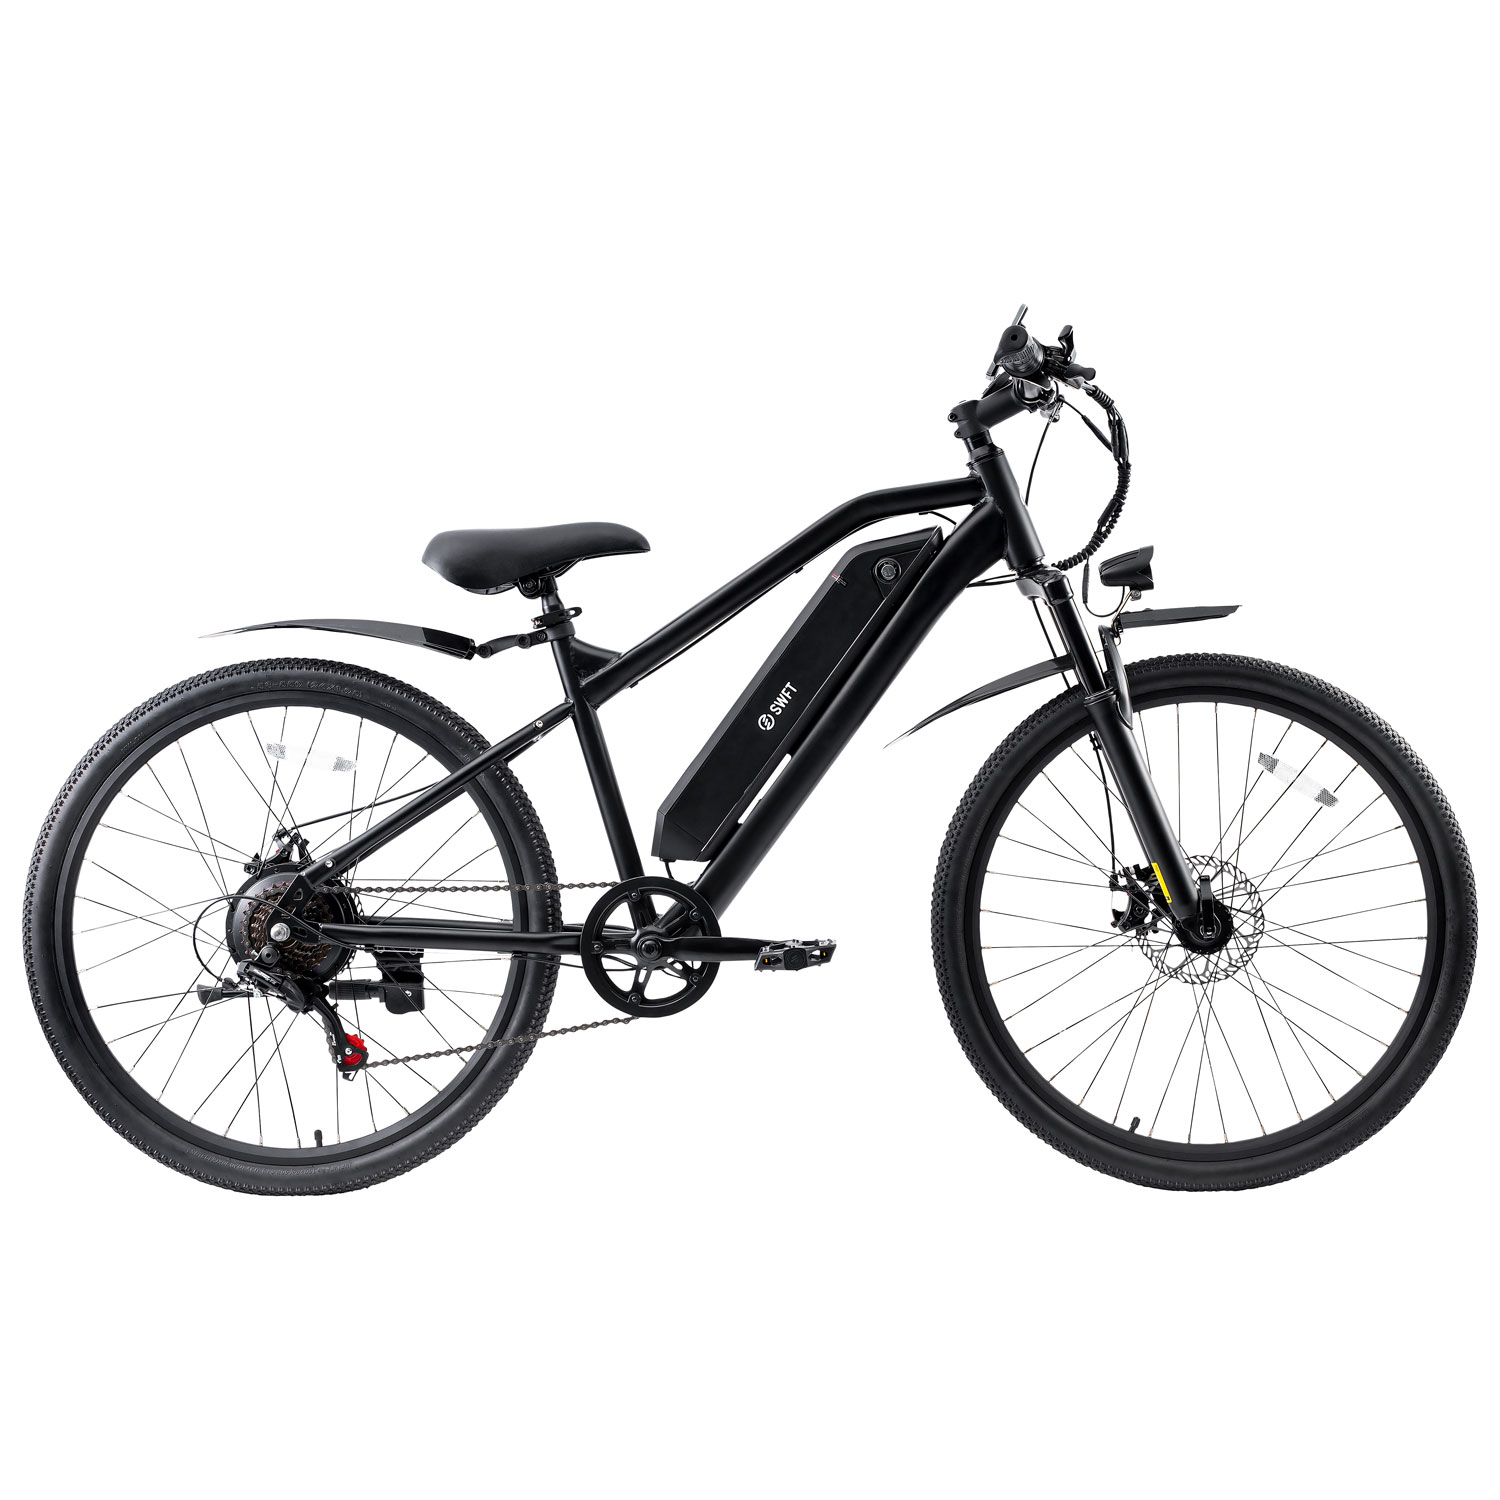 SWFT Edge Electric City Bike with up to 49.8km Battery Life - Black - Only at Best Buy